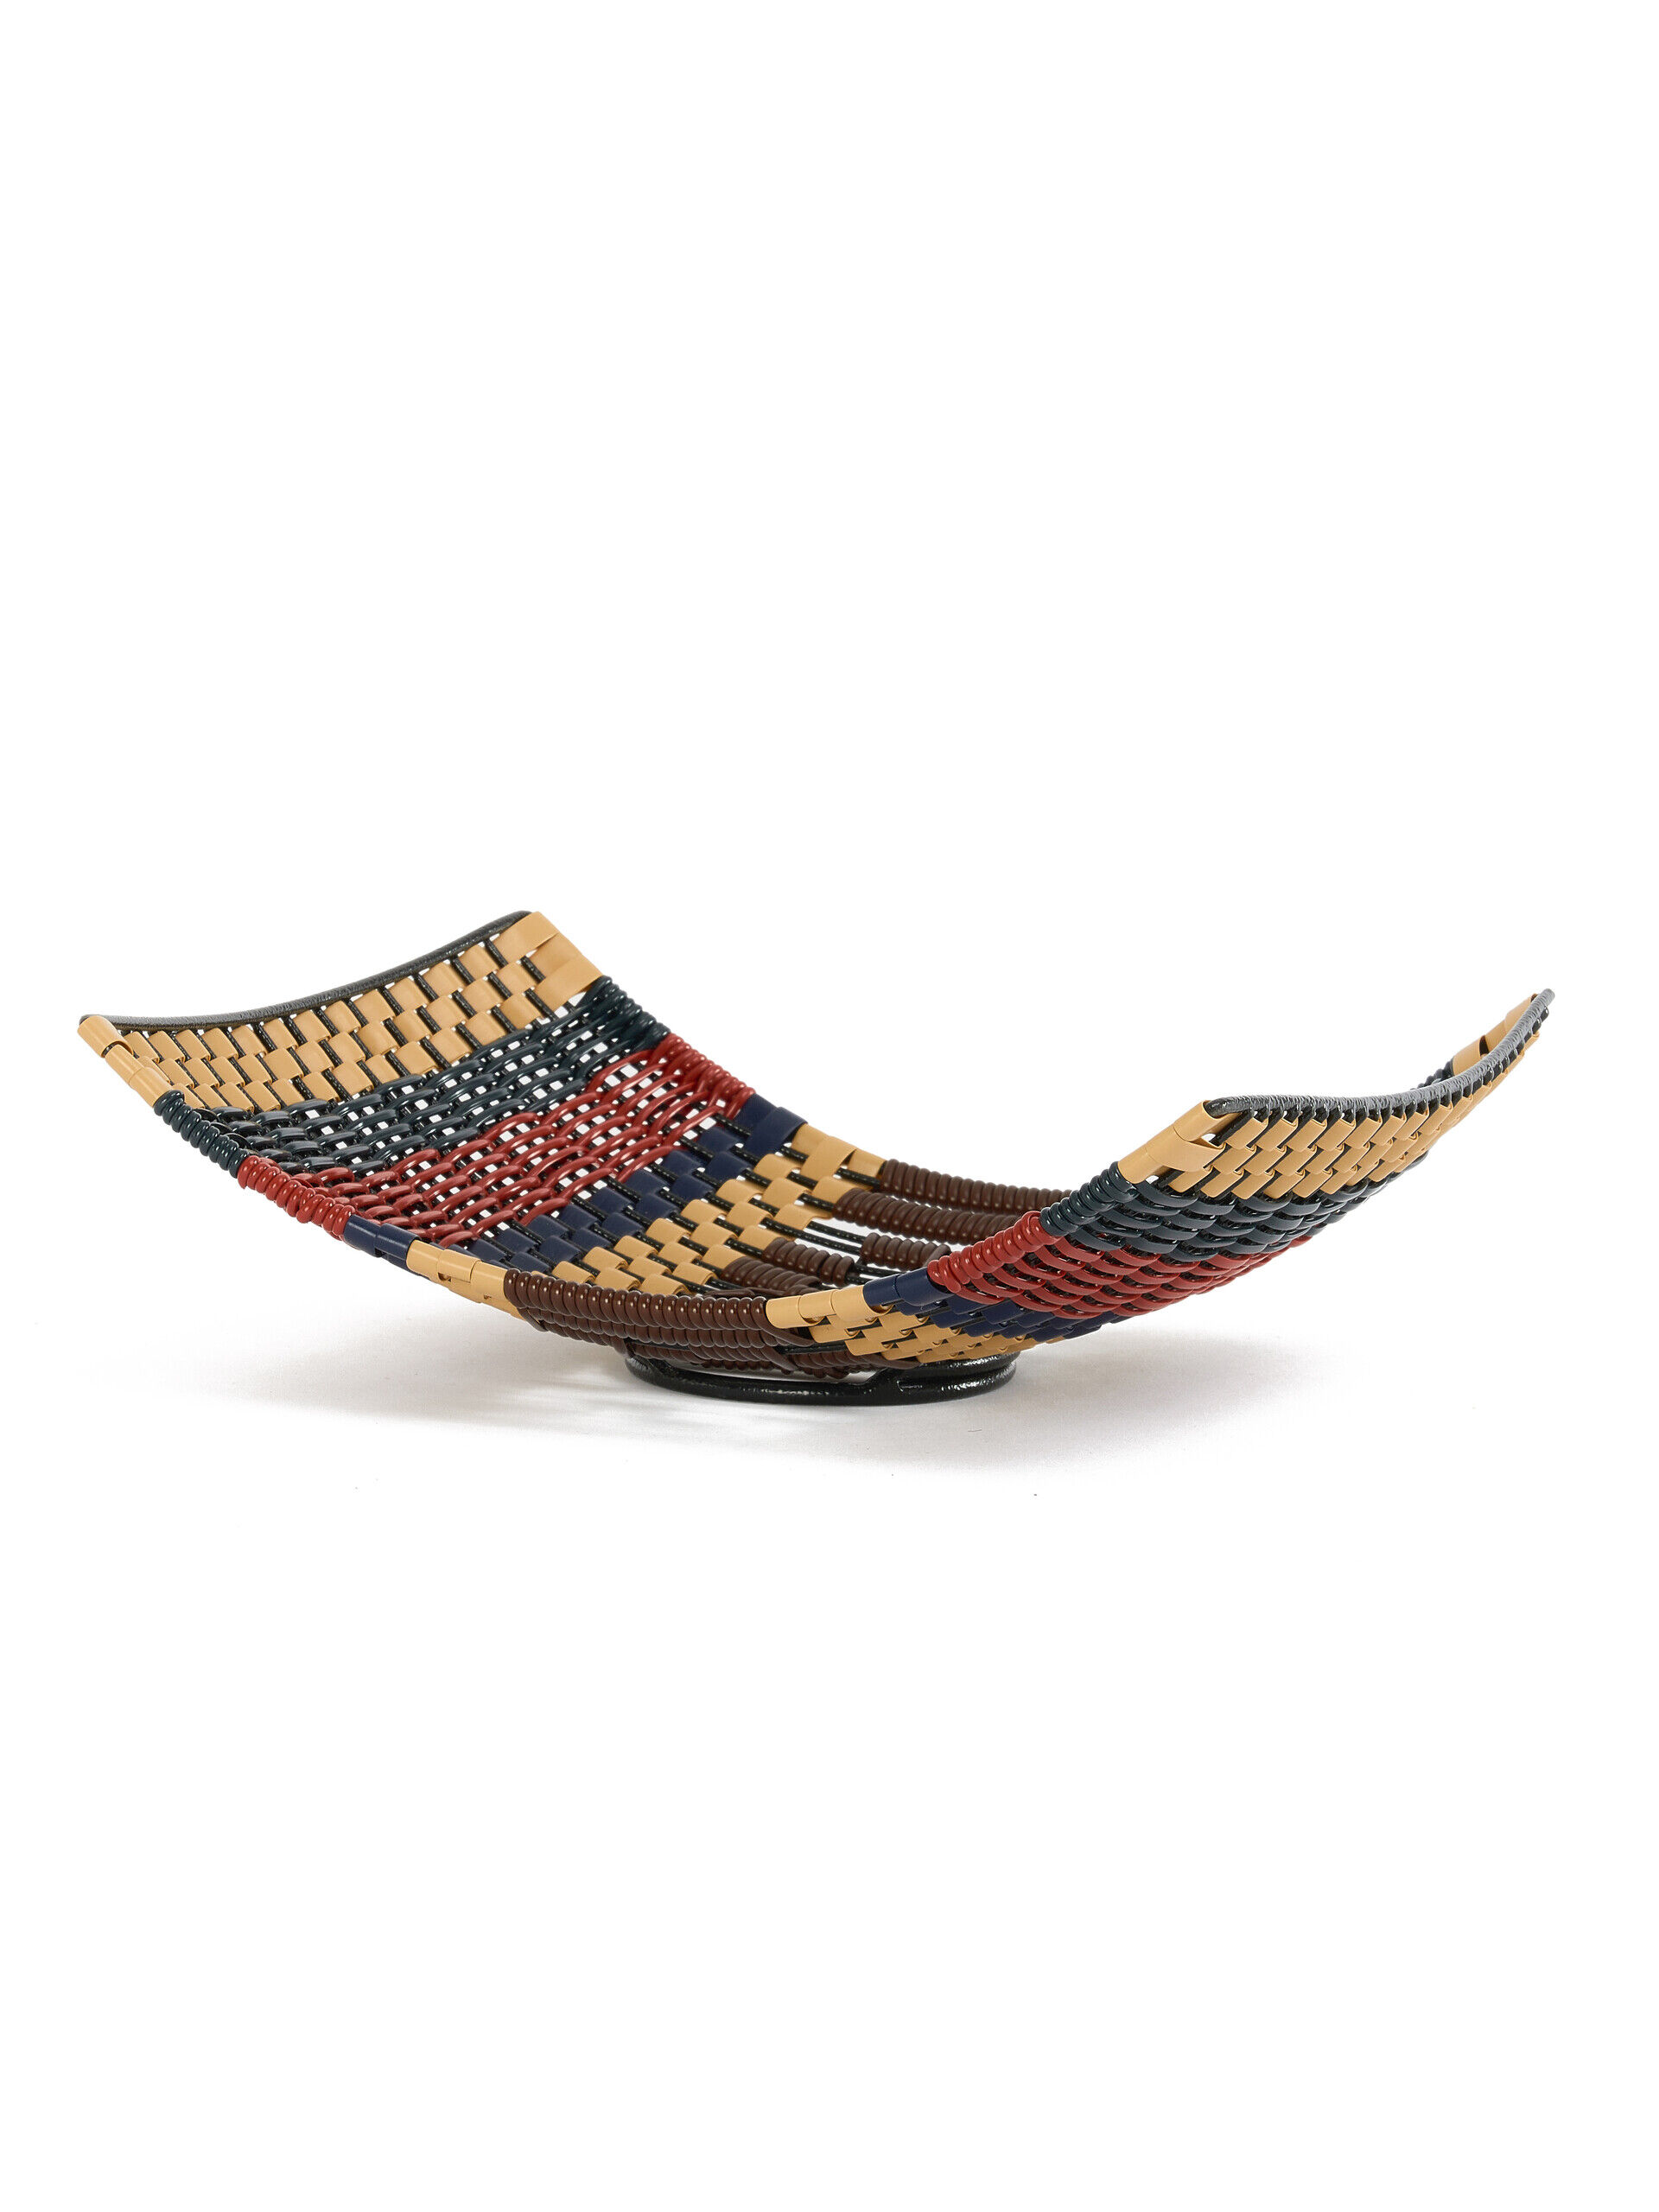 Blue and red Marni Market woven curved tray | Marni